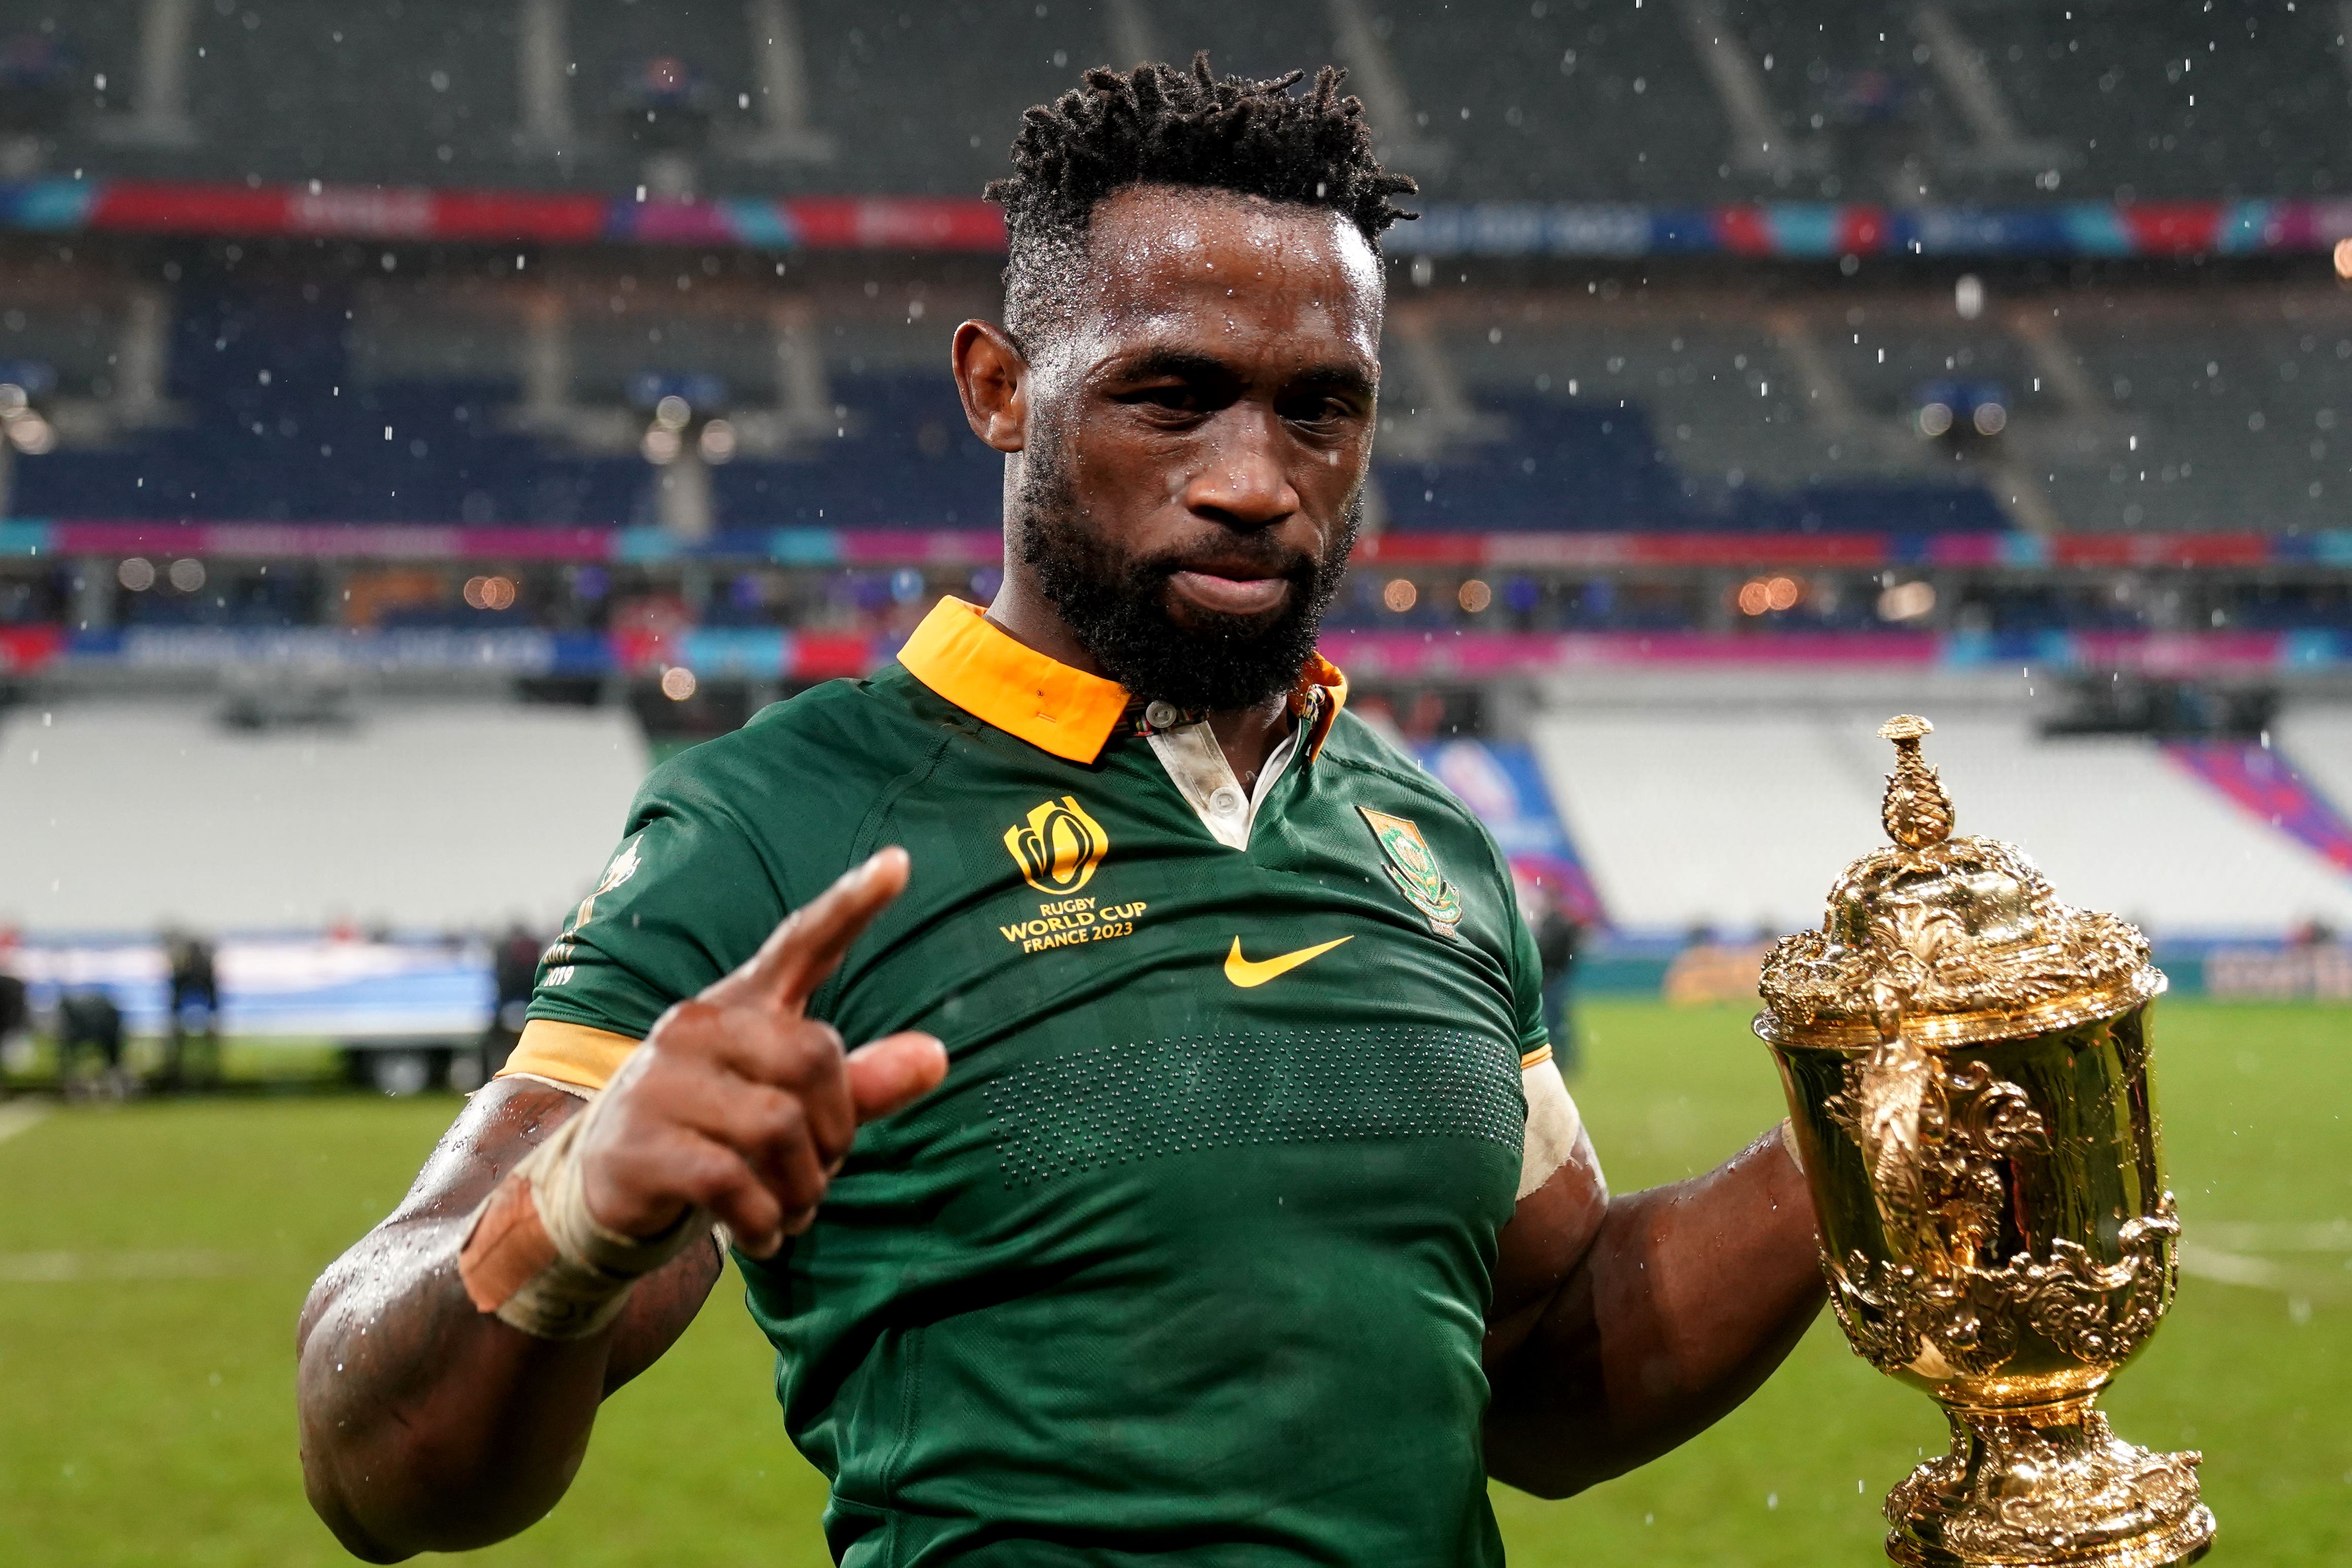 South Africa’s Siya Kolisi celebrates with the Webb Ellis Cup after his side’s victory over New Zealand in the World Cup final in Paris (David Davies/PA)